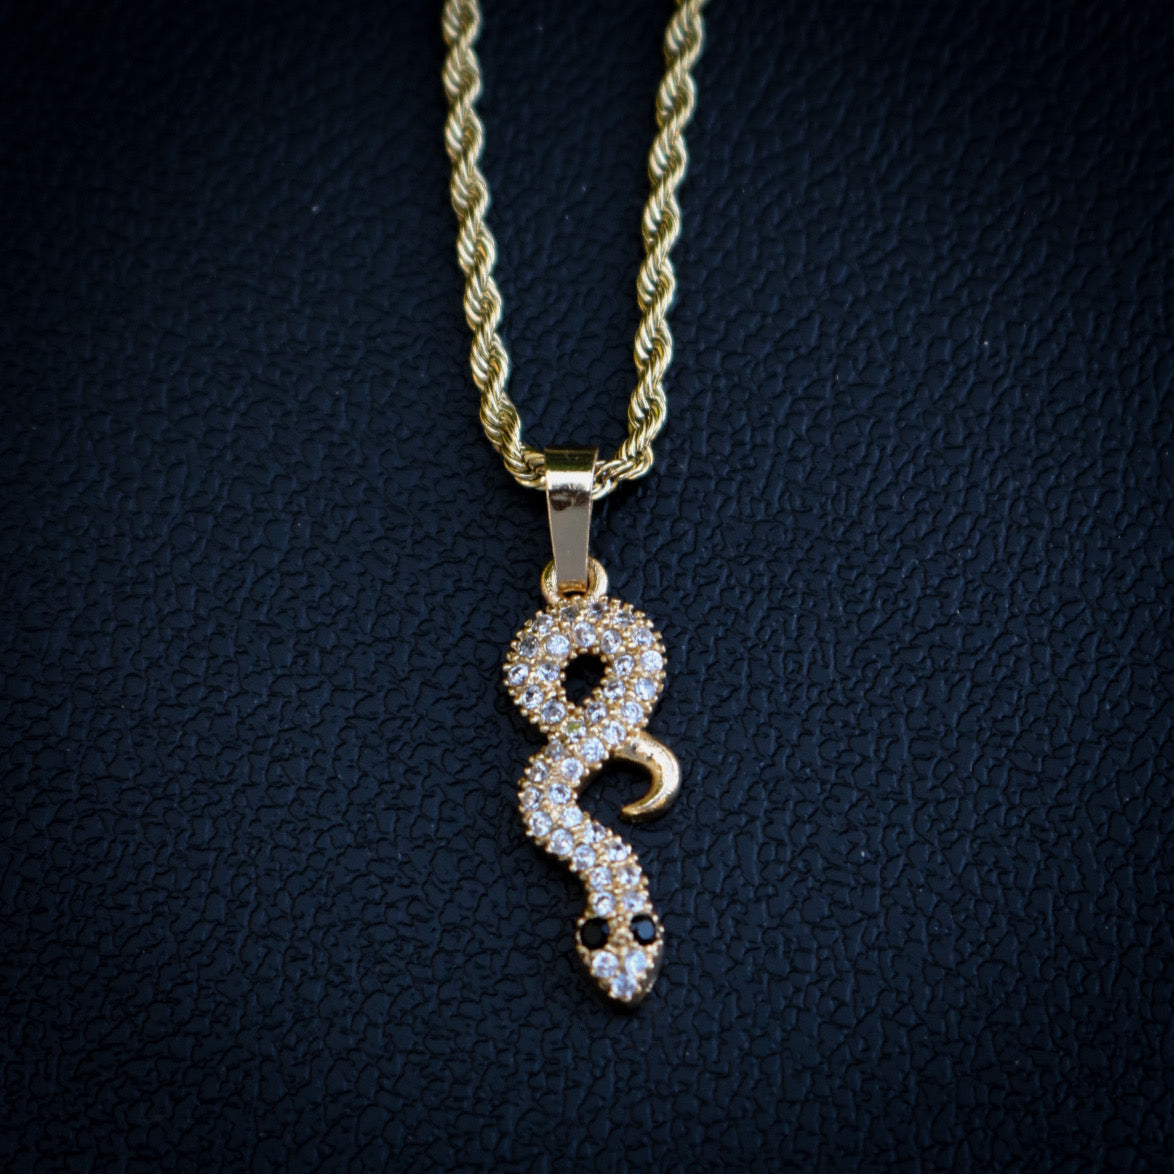 Micro Snake Necklace - Gold